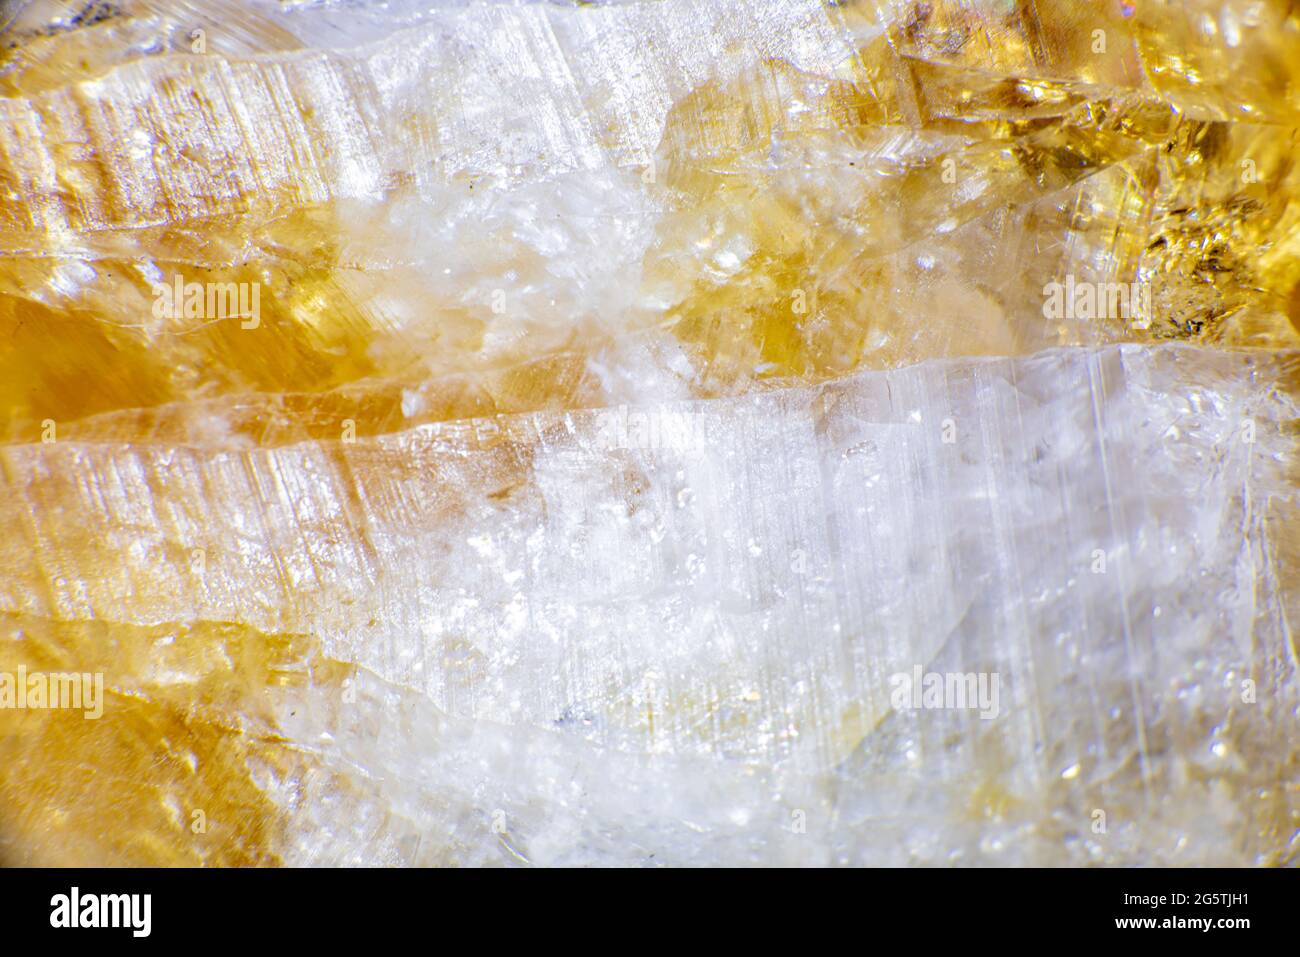 macro shooting of natural rock specimen. Raw crystal of Citrine yellow quartz gemstone from Brazil. Shimmering gold background. High quality photo Stock Photo